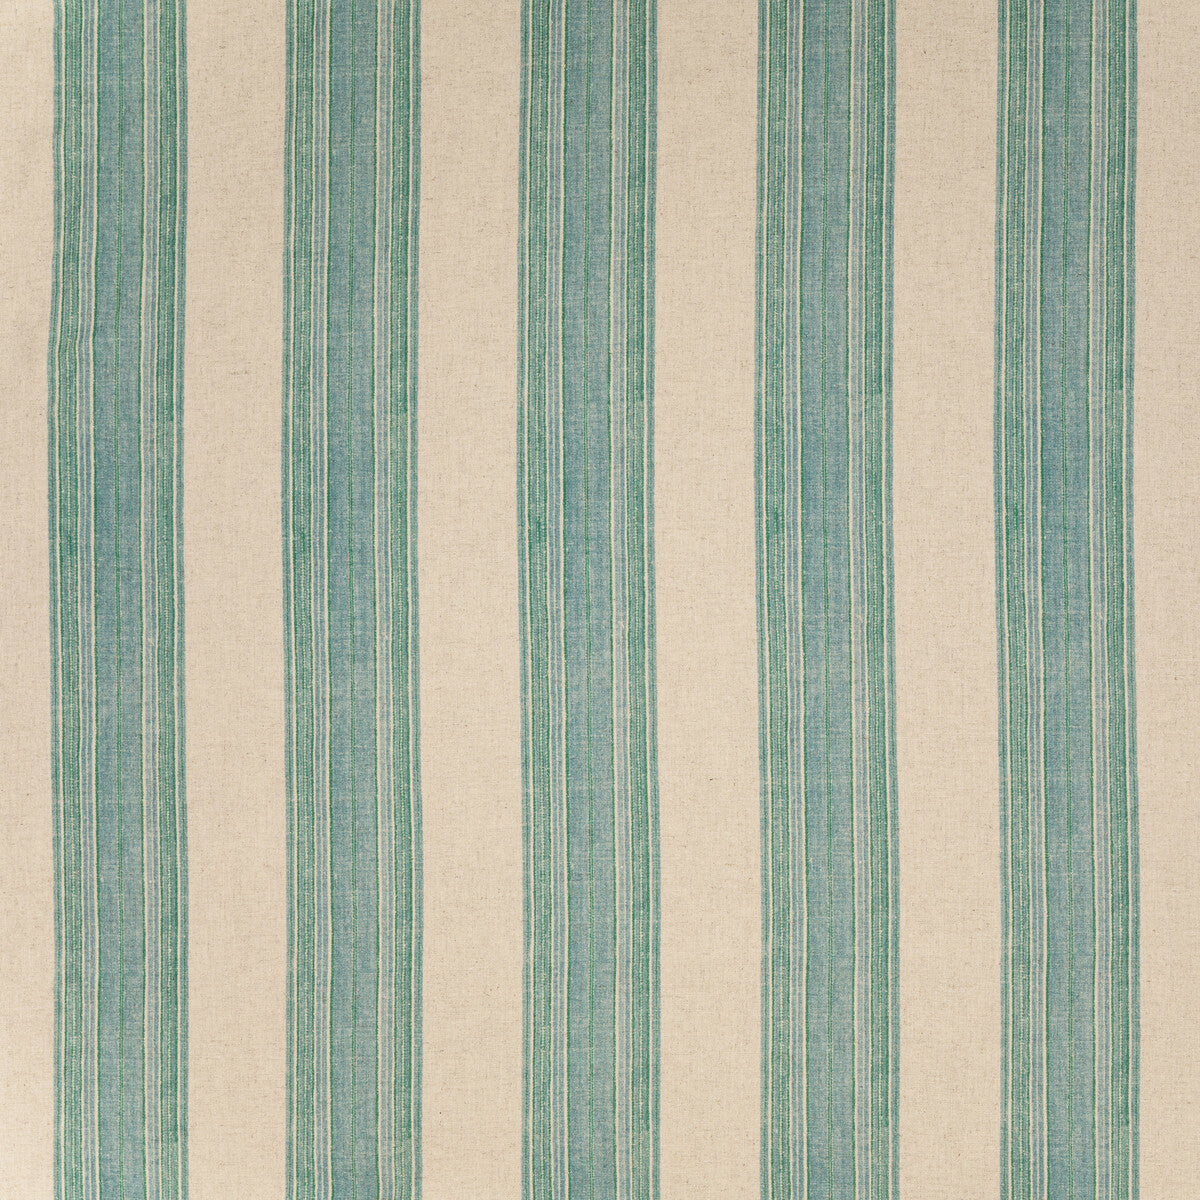 Mifflin Stripe fabric in aquamarine color - pattern BFC-3709.13.0 - by Lee Jofa in the Blithfield Eden collection